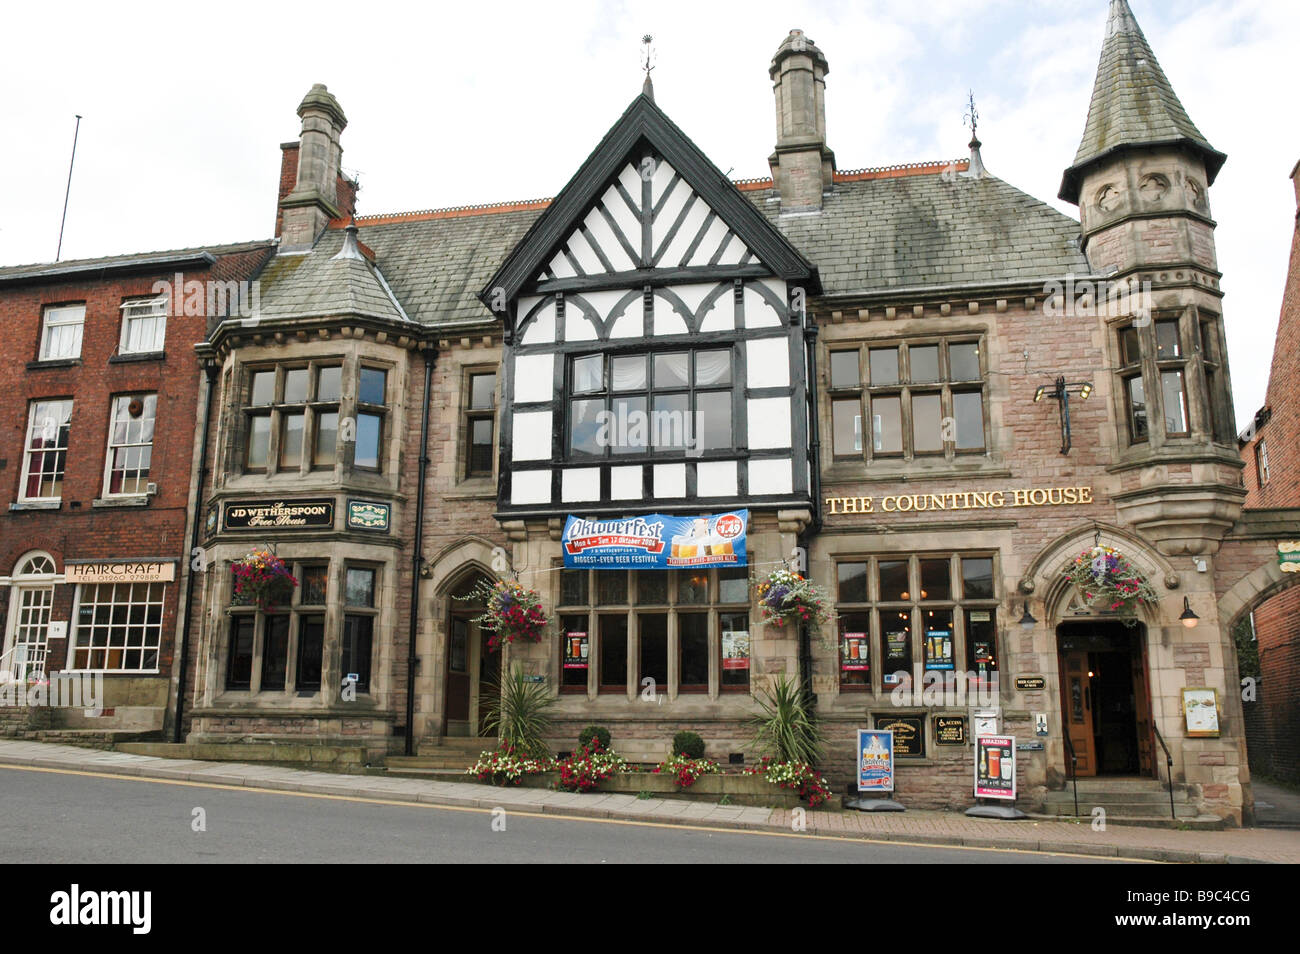 The Counting House, a J D Weatherspoon pub in Congleton, Cheshire, England. It was formerly a branch of the Nat West Bank. Stock Photo